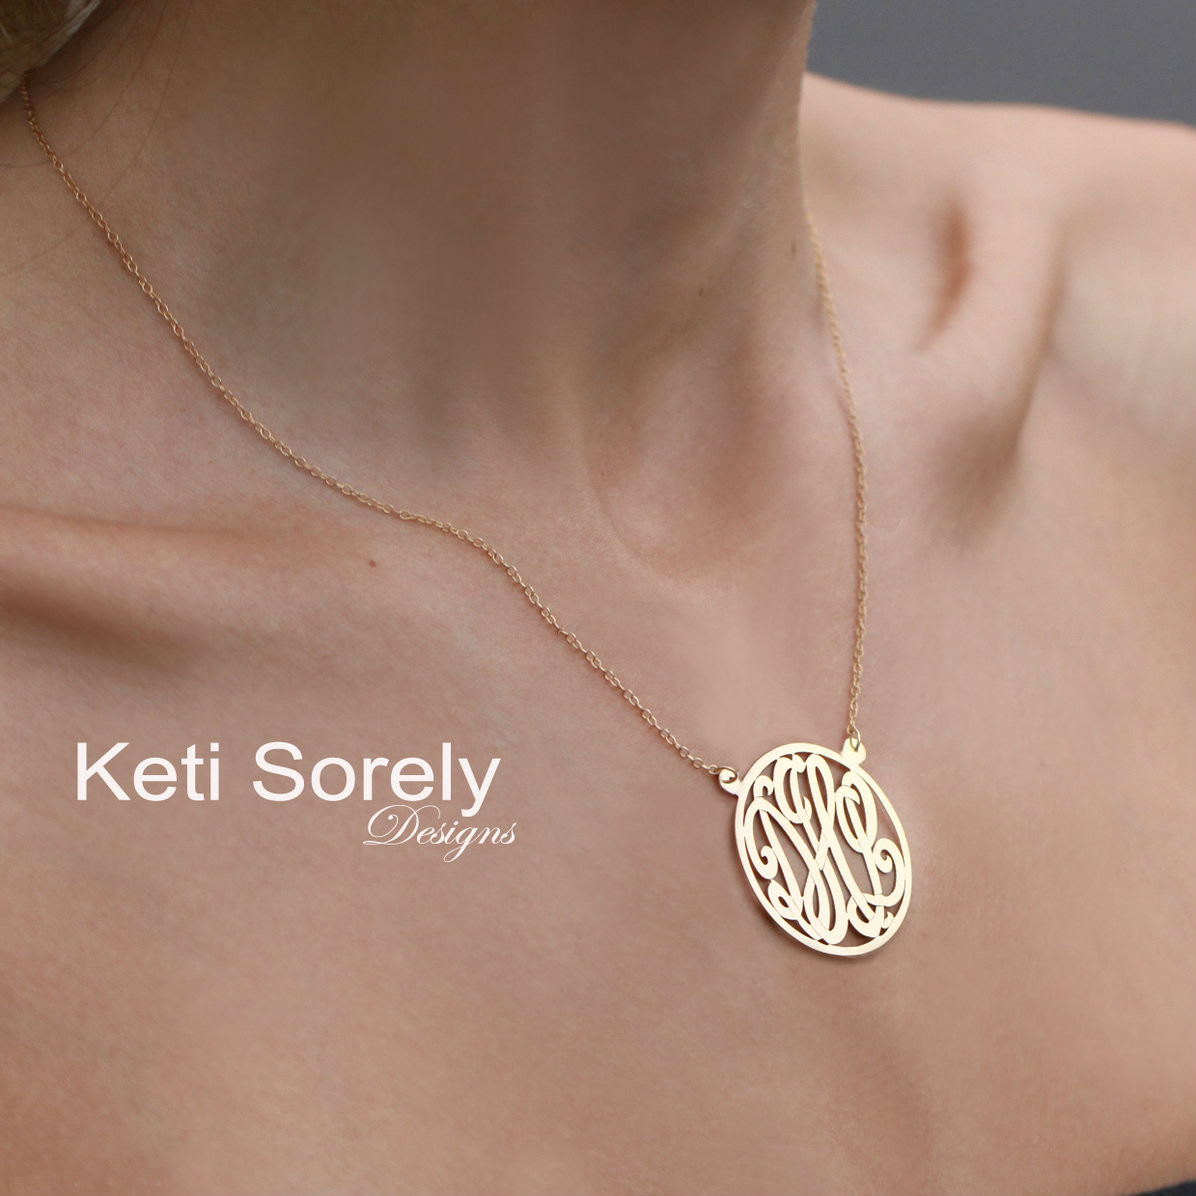 Order any initials Sterling Silver and 24K Gold Designer Monogram necklace 